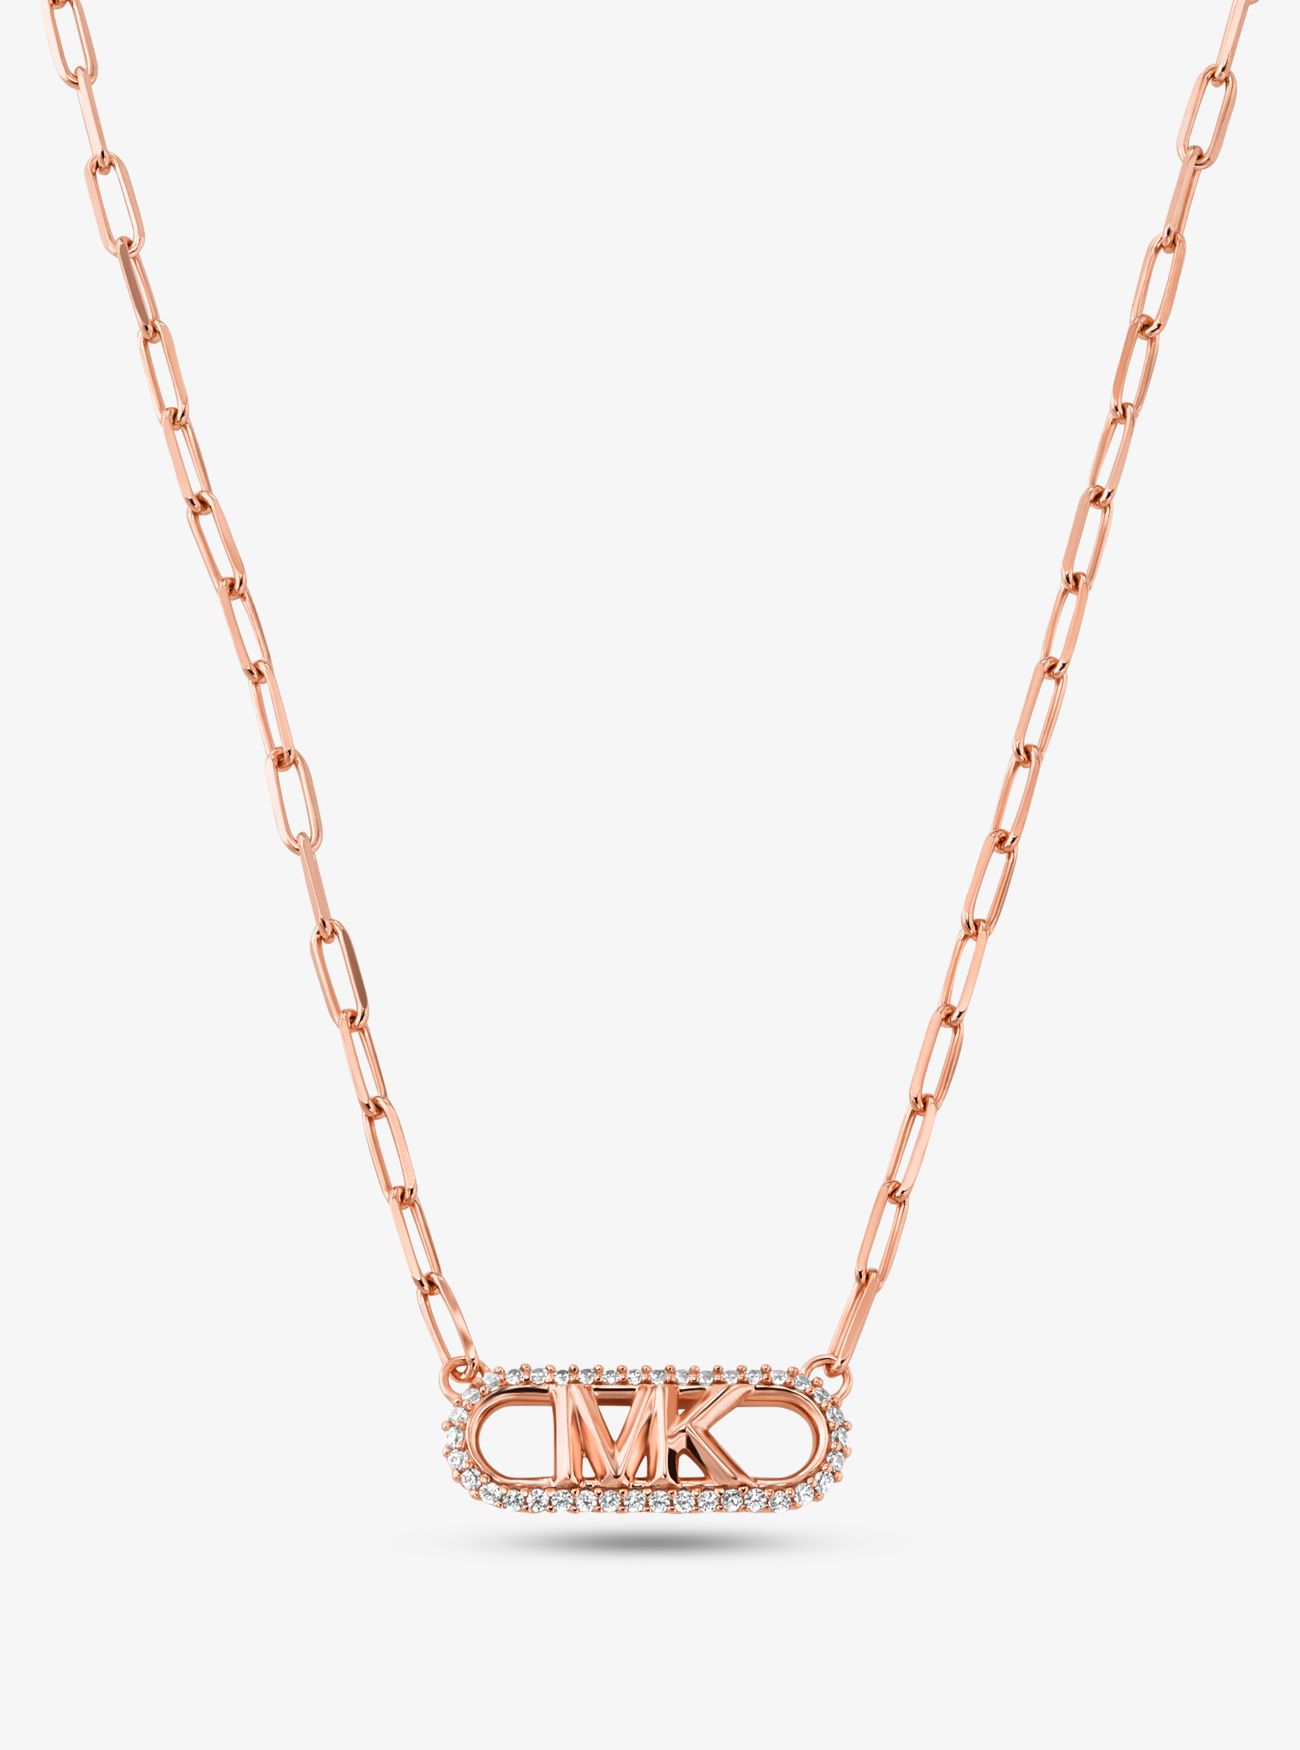 MK Precious Metal-Plated Sterling Silver Empire Logo Chain Link Necklace - Rose Gold - Michael Kors